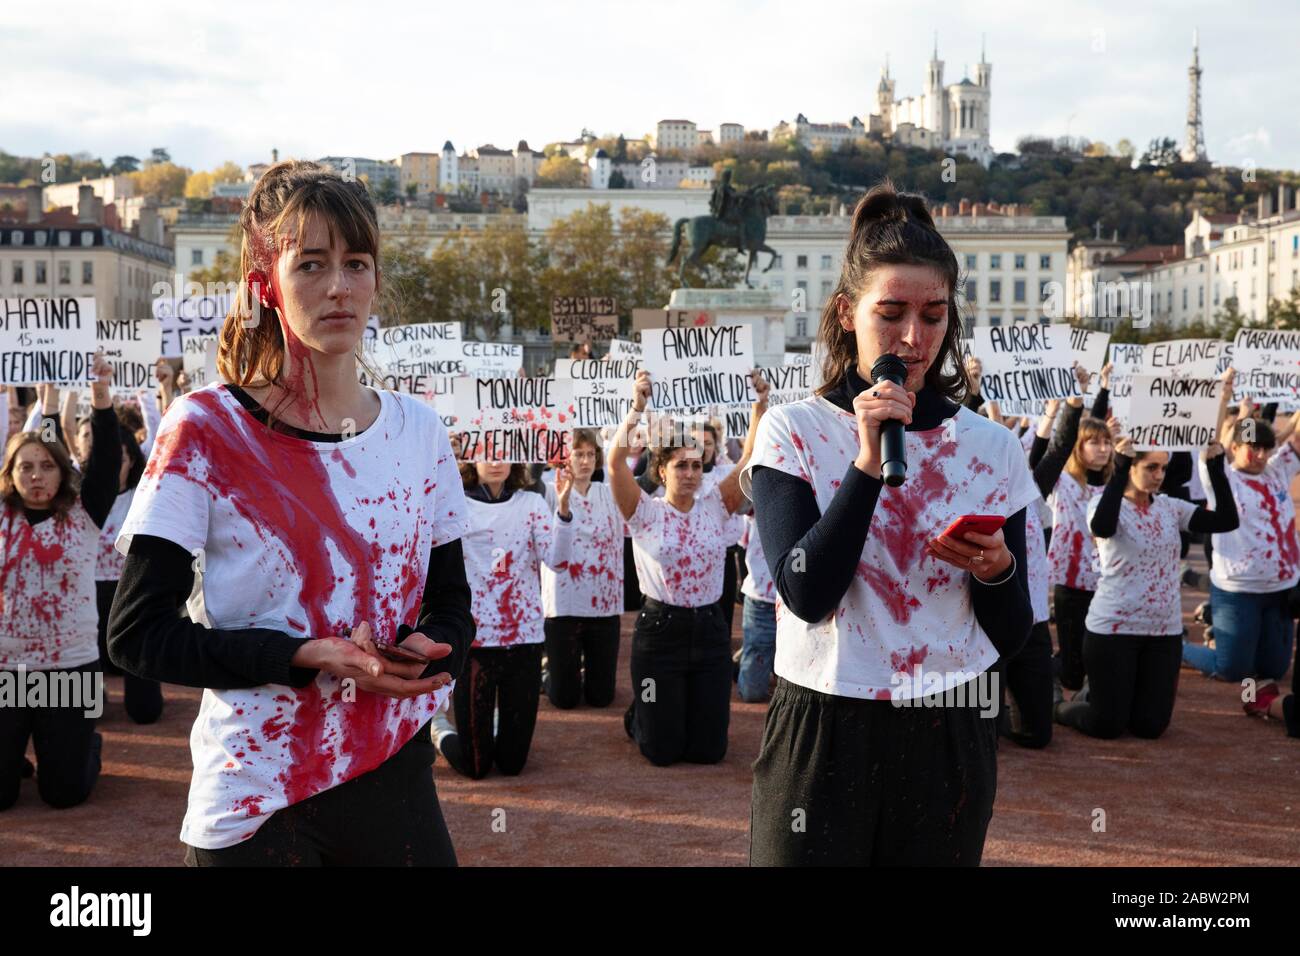 'Today, we are here to accuse men, guilty of feminicide,' say the organizers during a protest against femicide and violence against women, Stock Photo